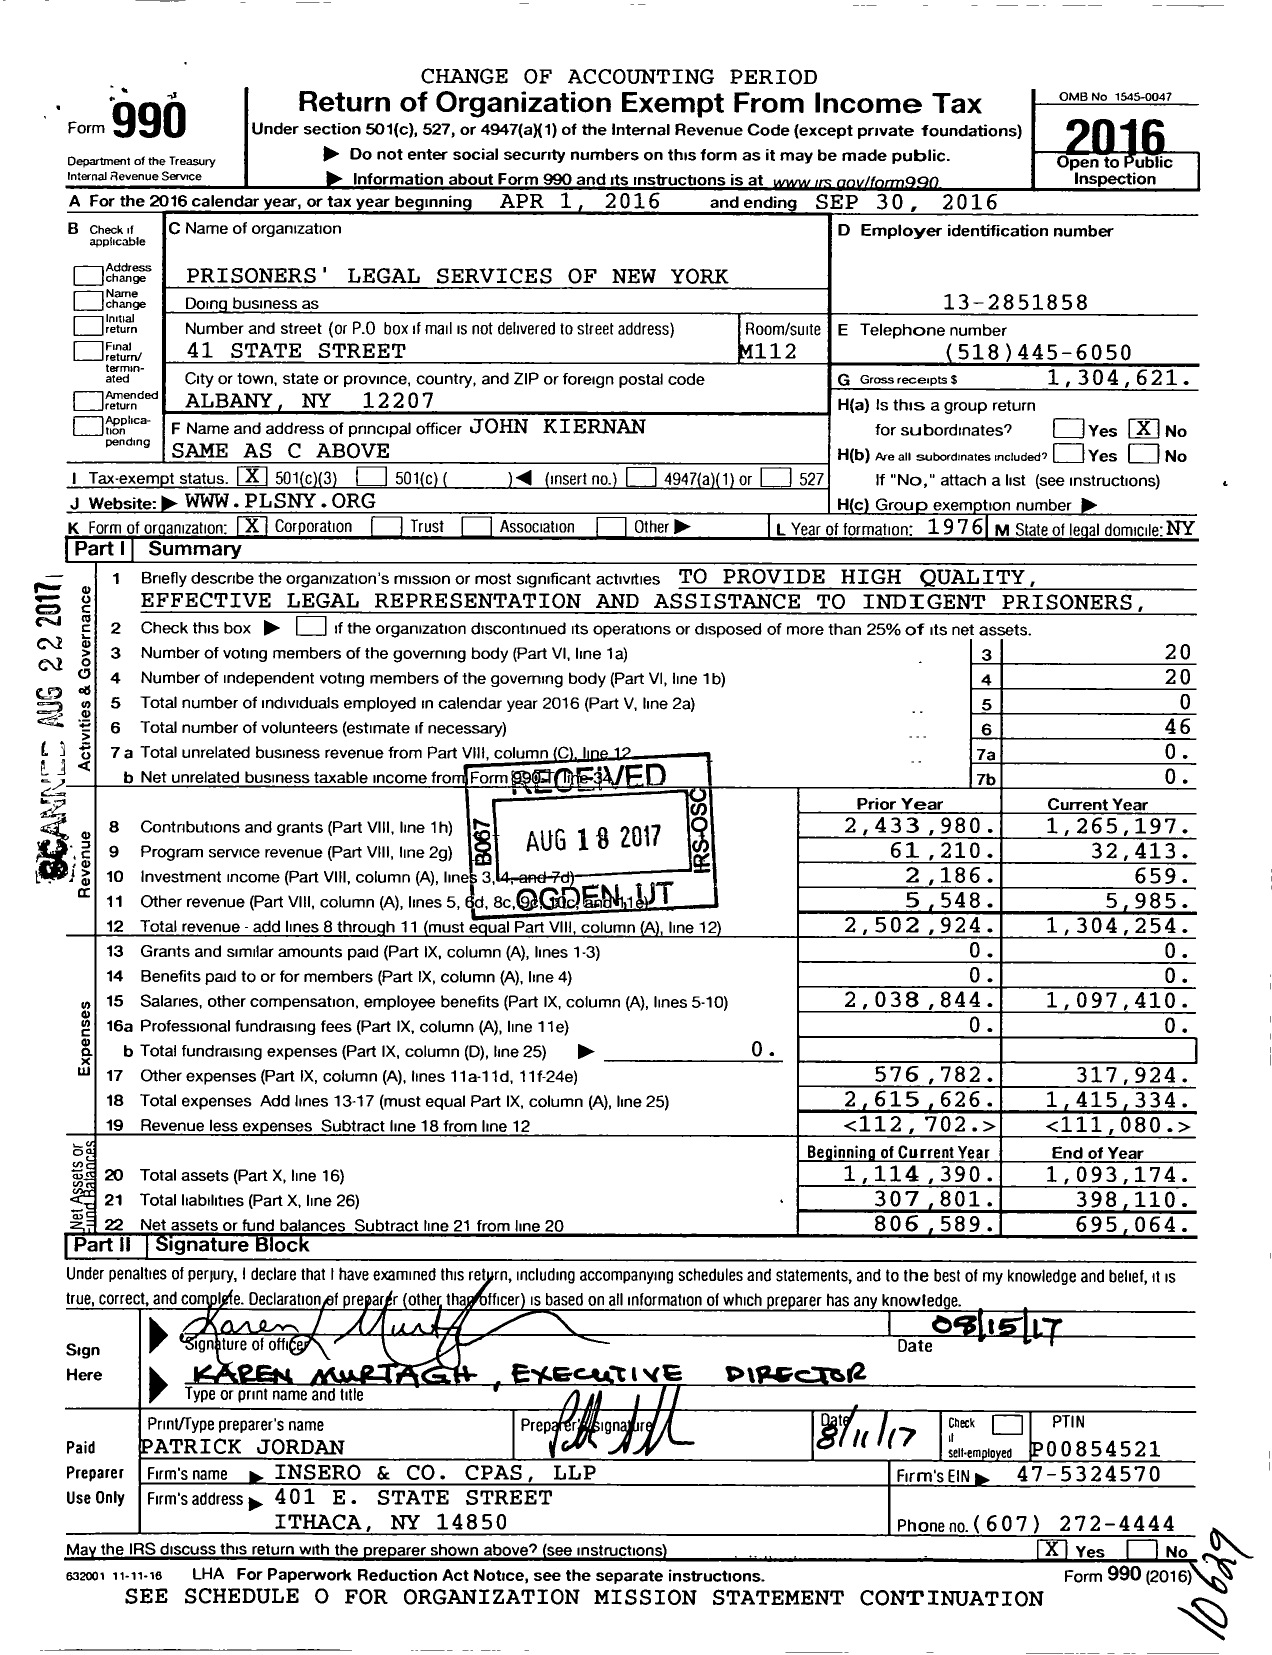 Image of first page of 2015 Form 990 for Prisoners Legal Services of New York